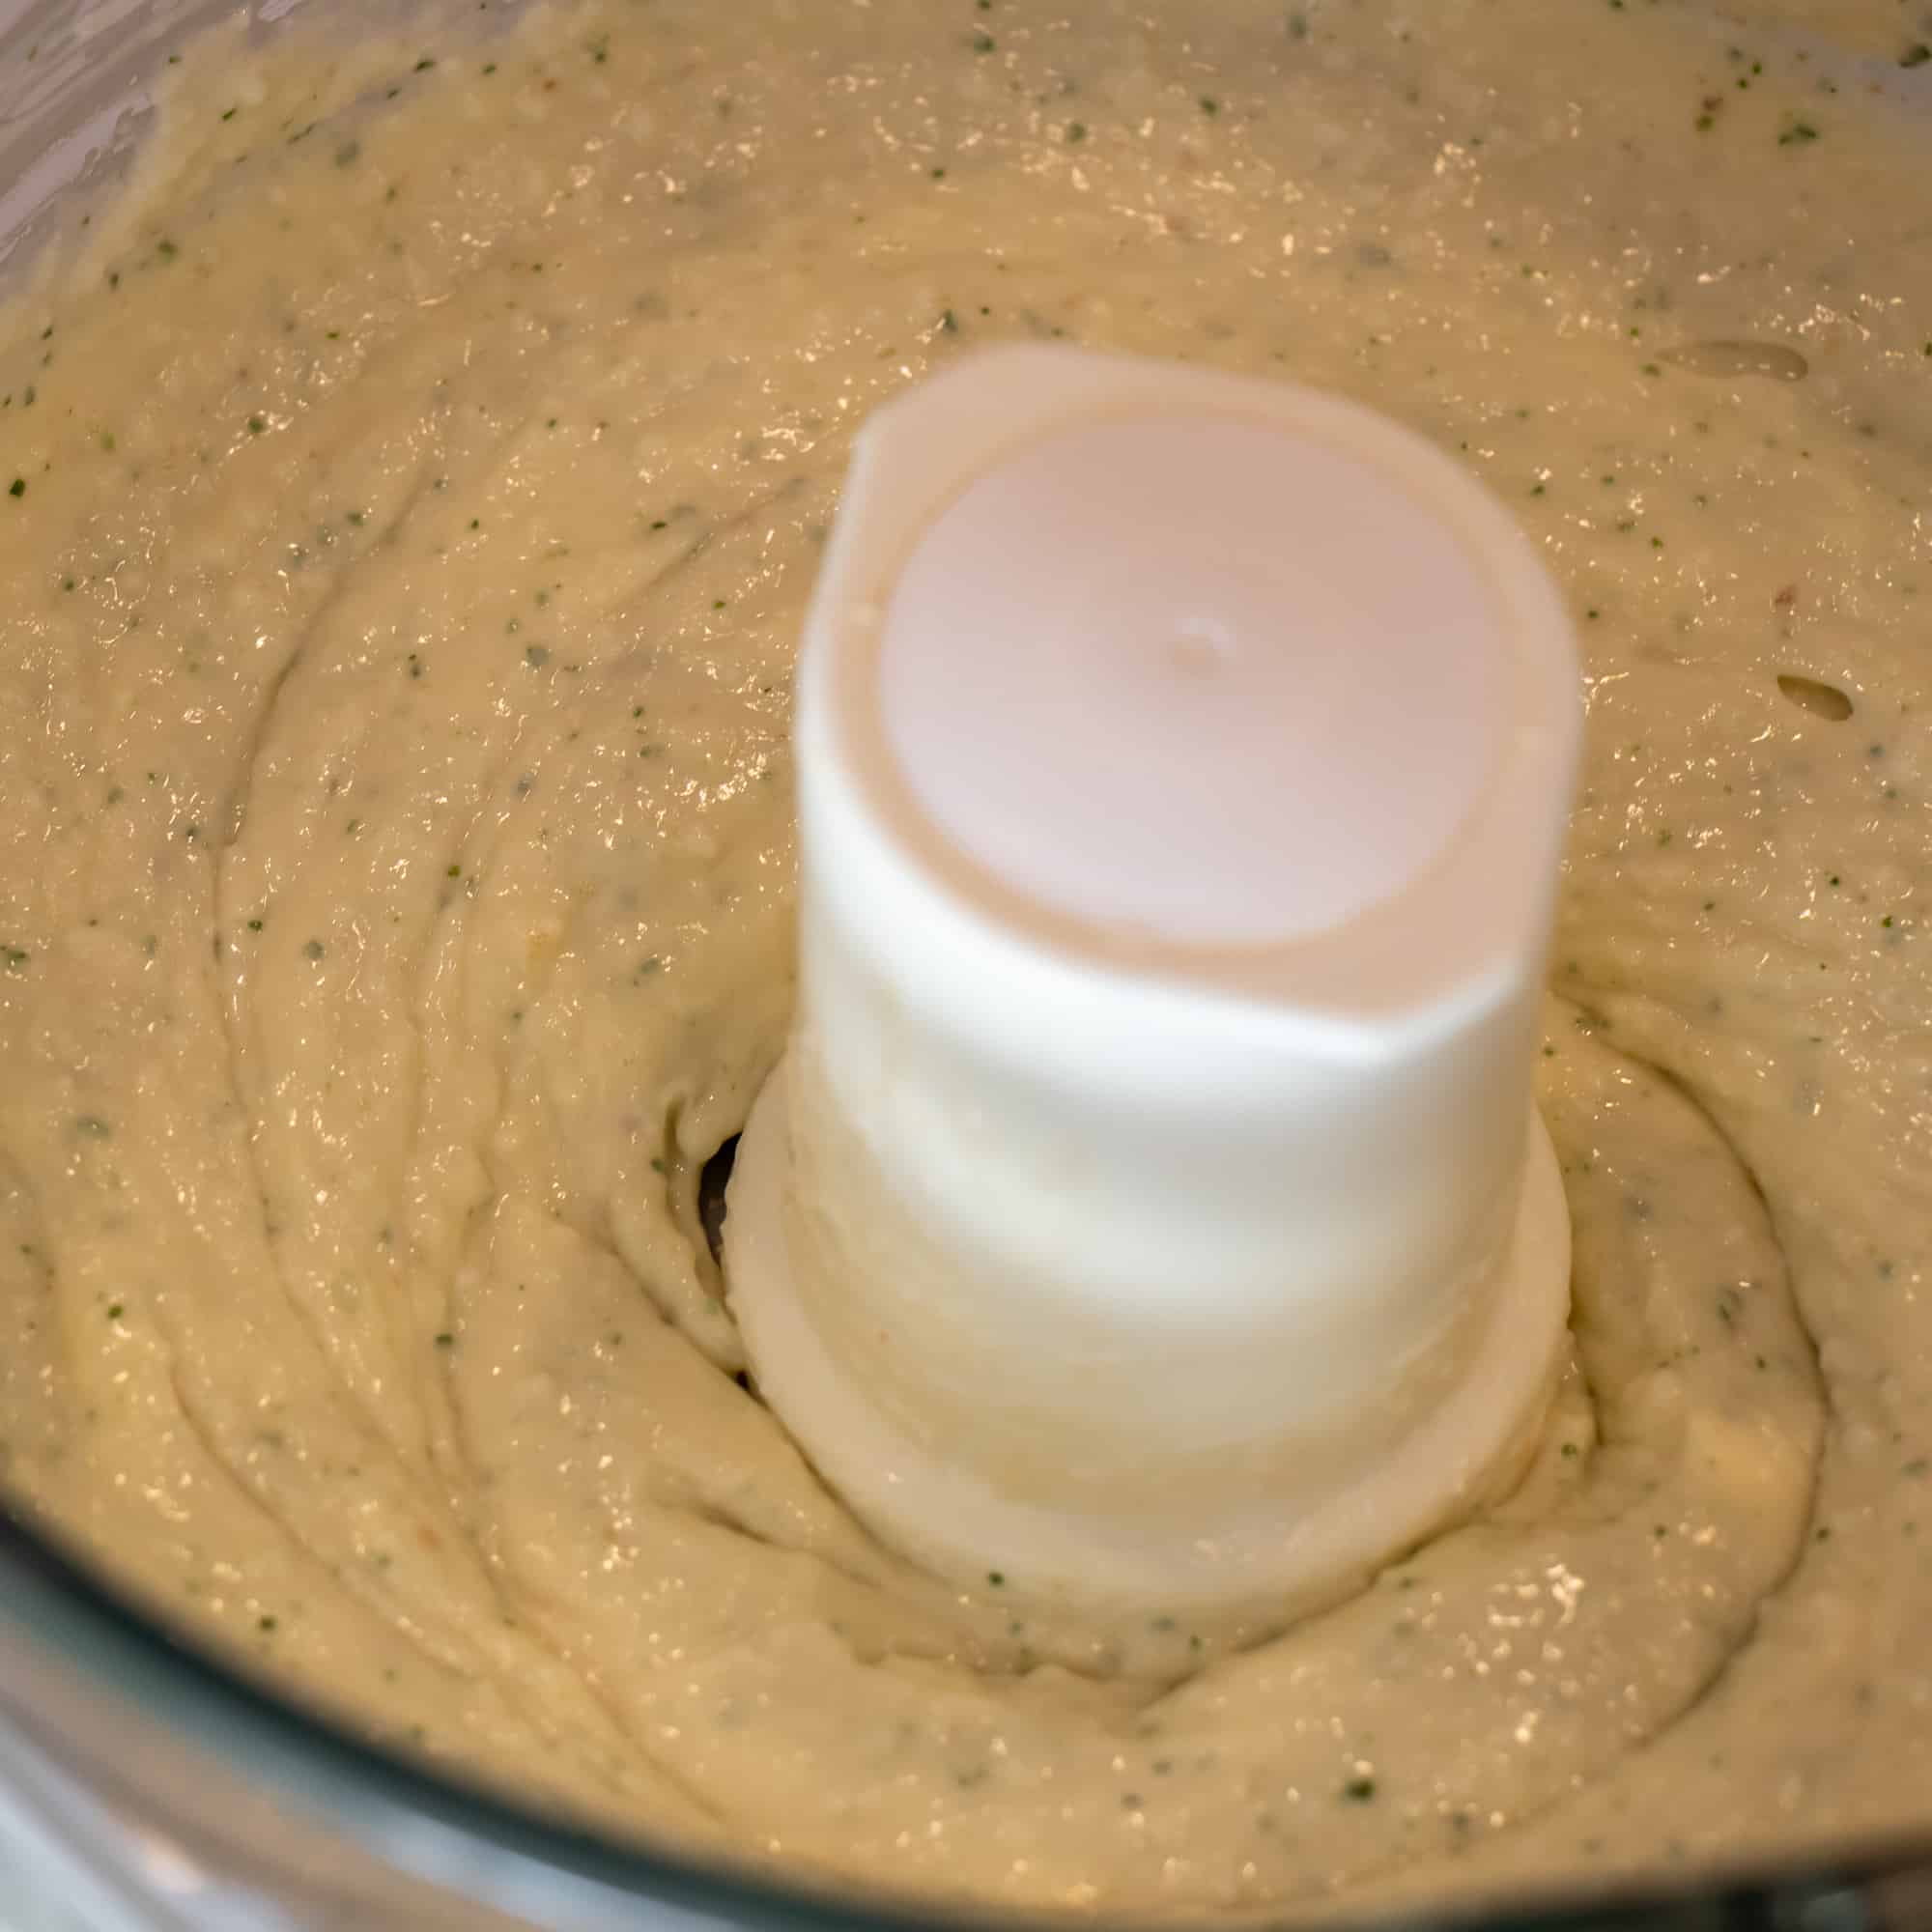 Blend the dip in a food processor or blender until smooth and creamy.